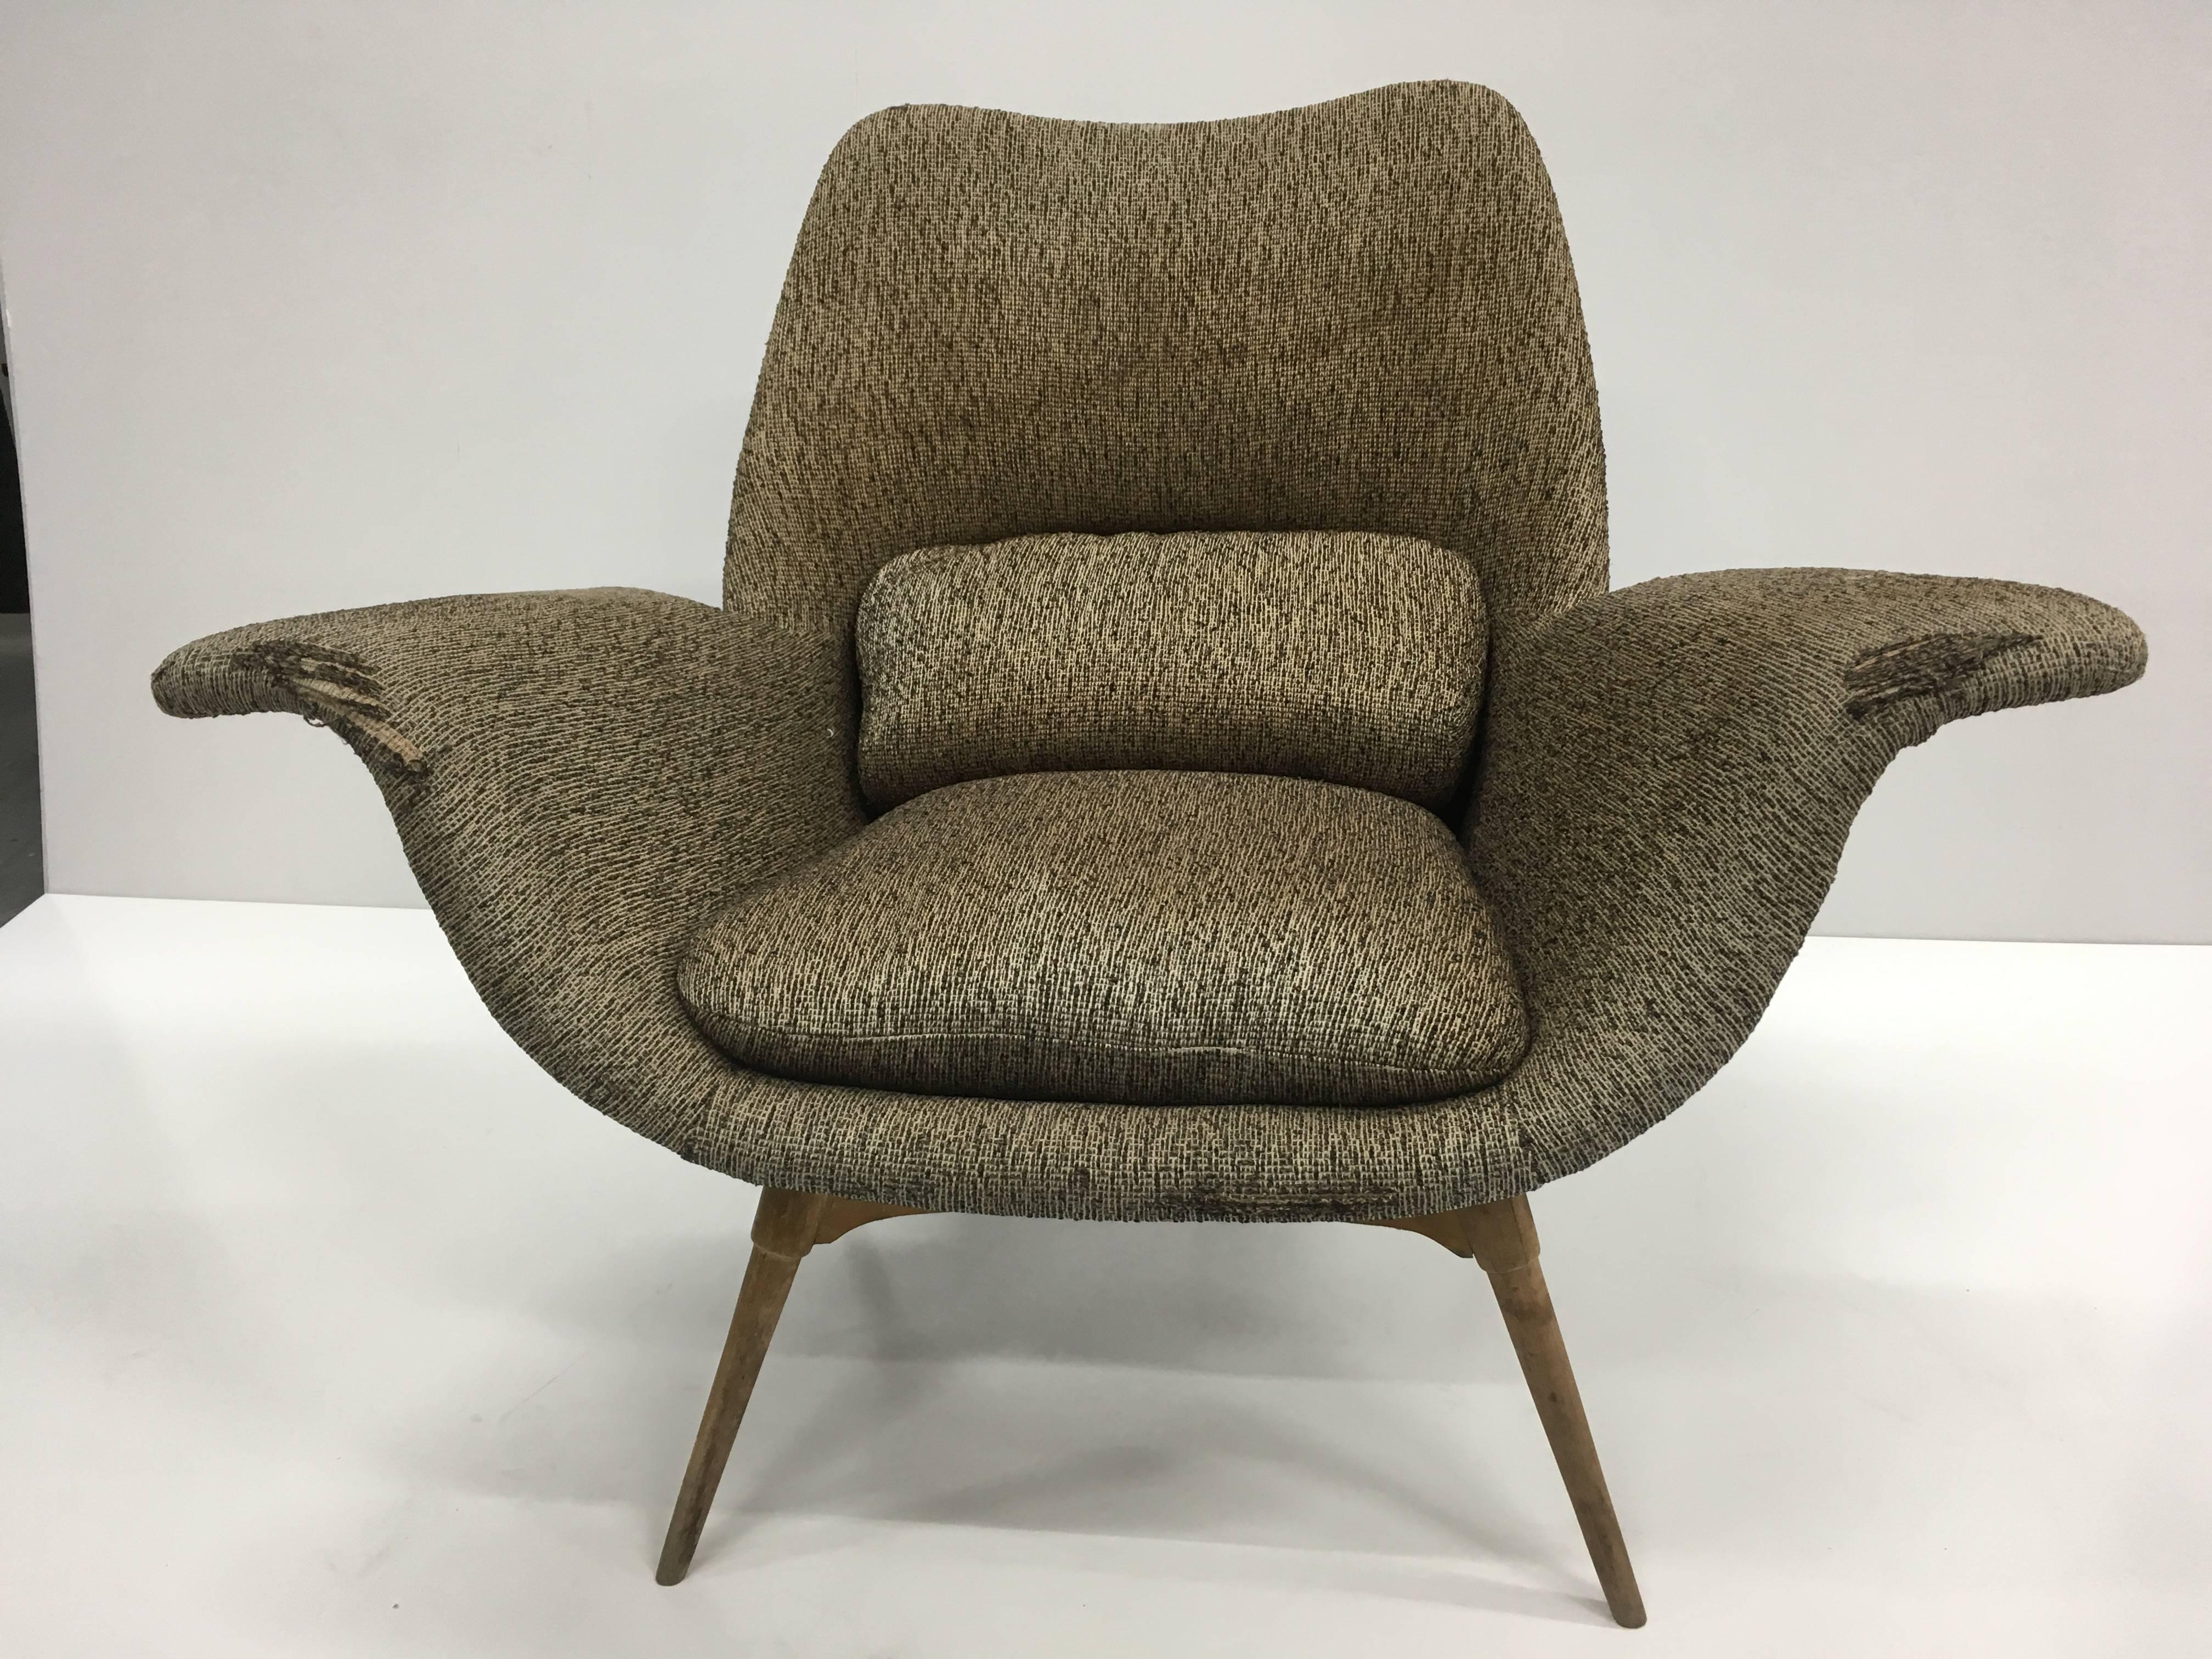 Rare and extremely desirable 'Eleanor' chair by iconic Australian designer Grant Featherston. In original 'as found' condition. 

This is a true collector's item- they very seldom come to market and are one of the most sought after of